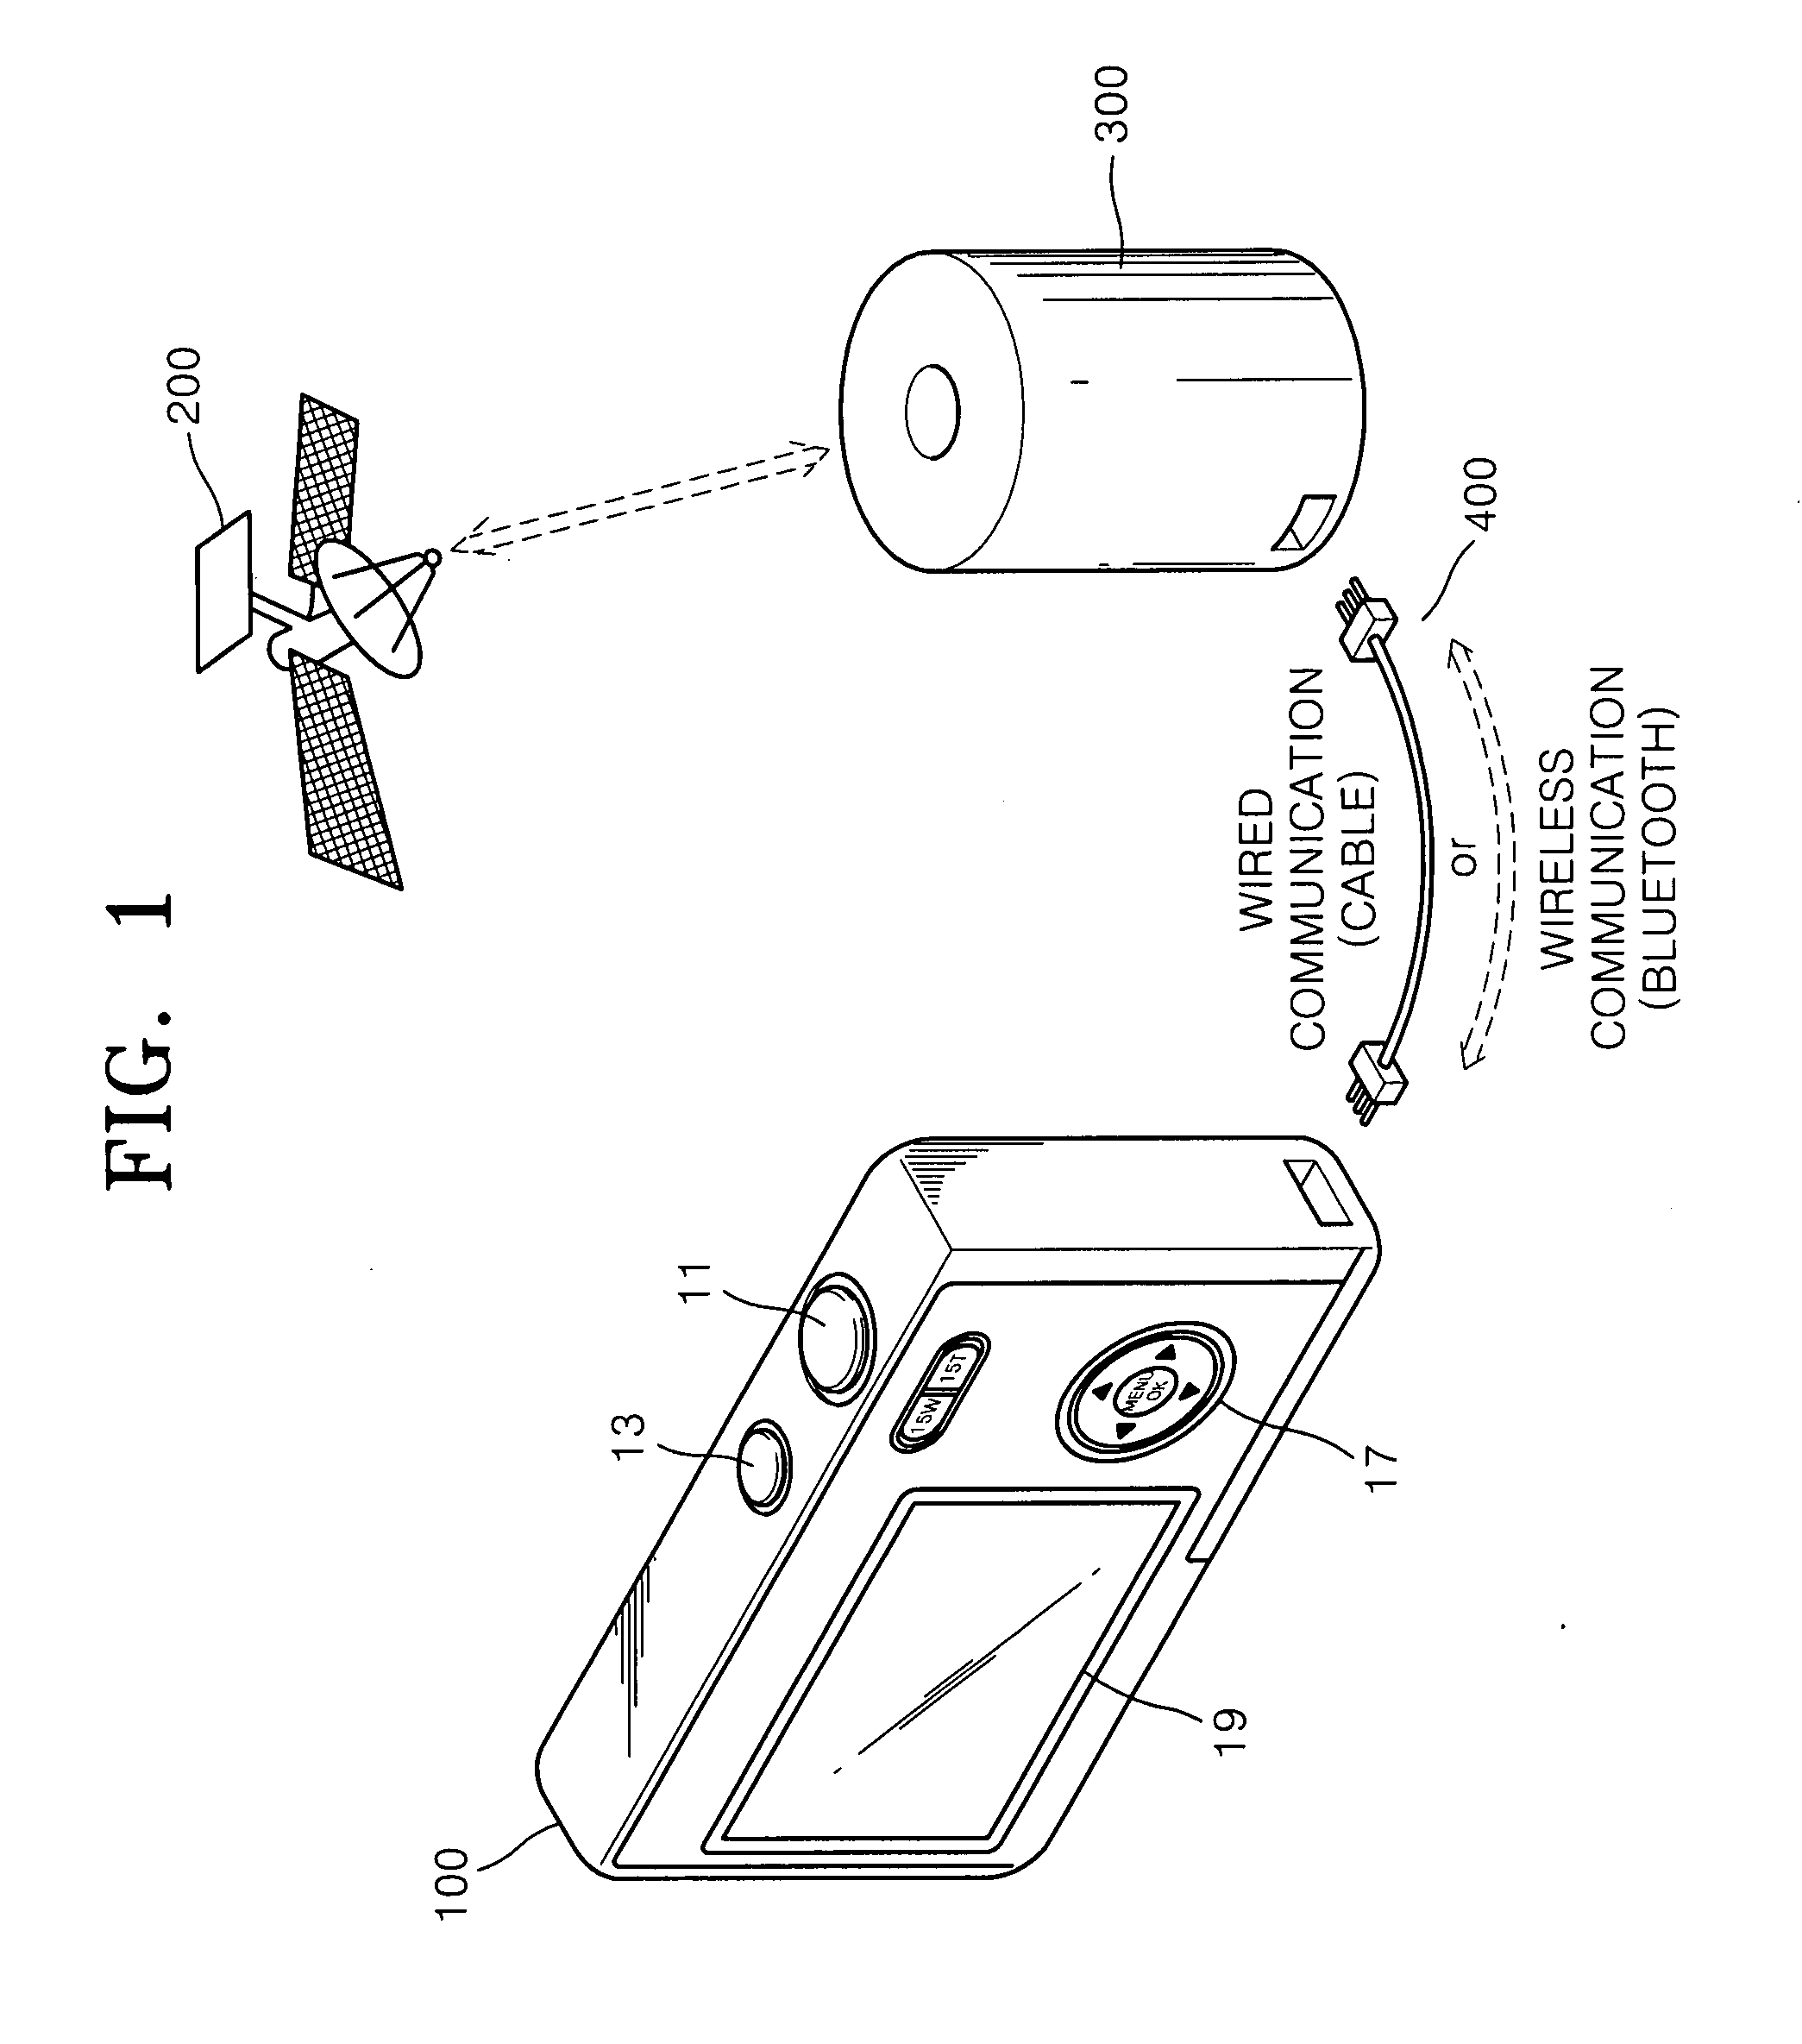 System and method for inserting position information into image